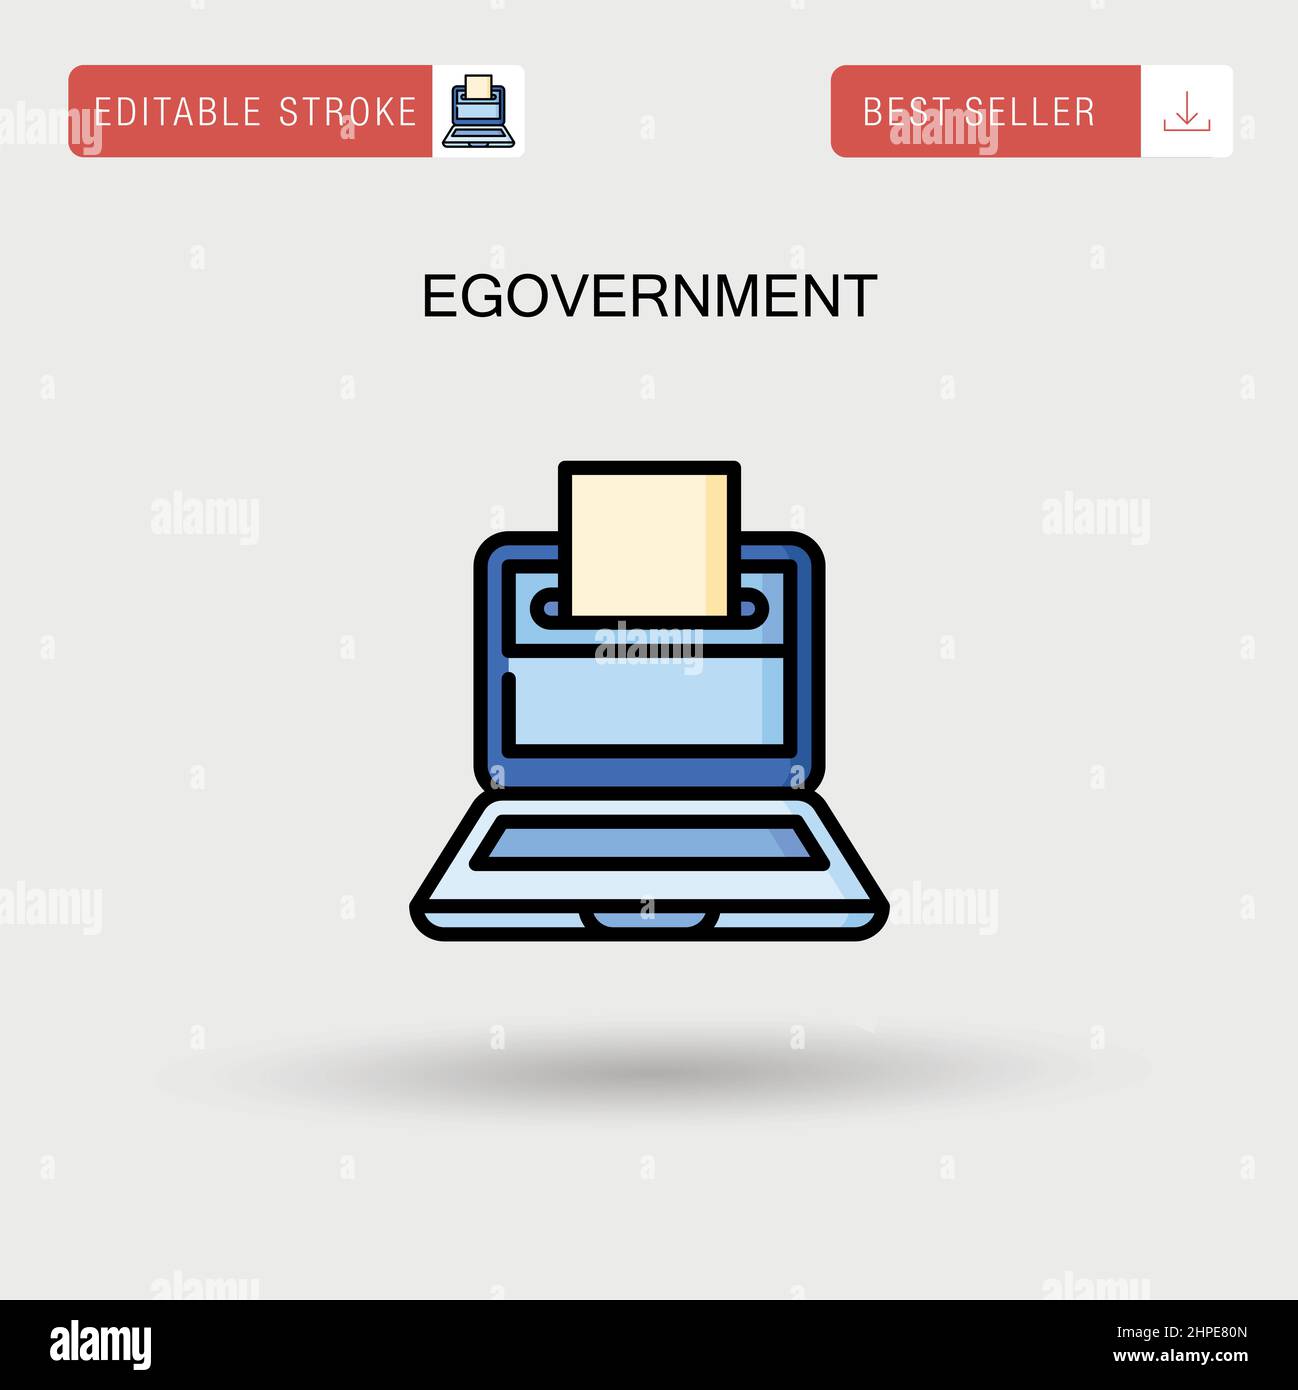 Egovernment Simple vector icon. Stock Vector